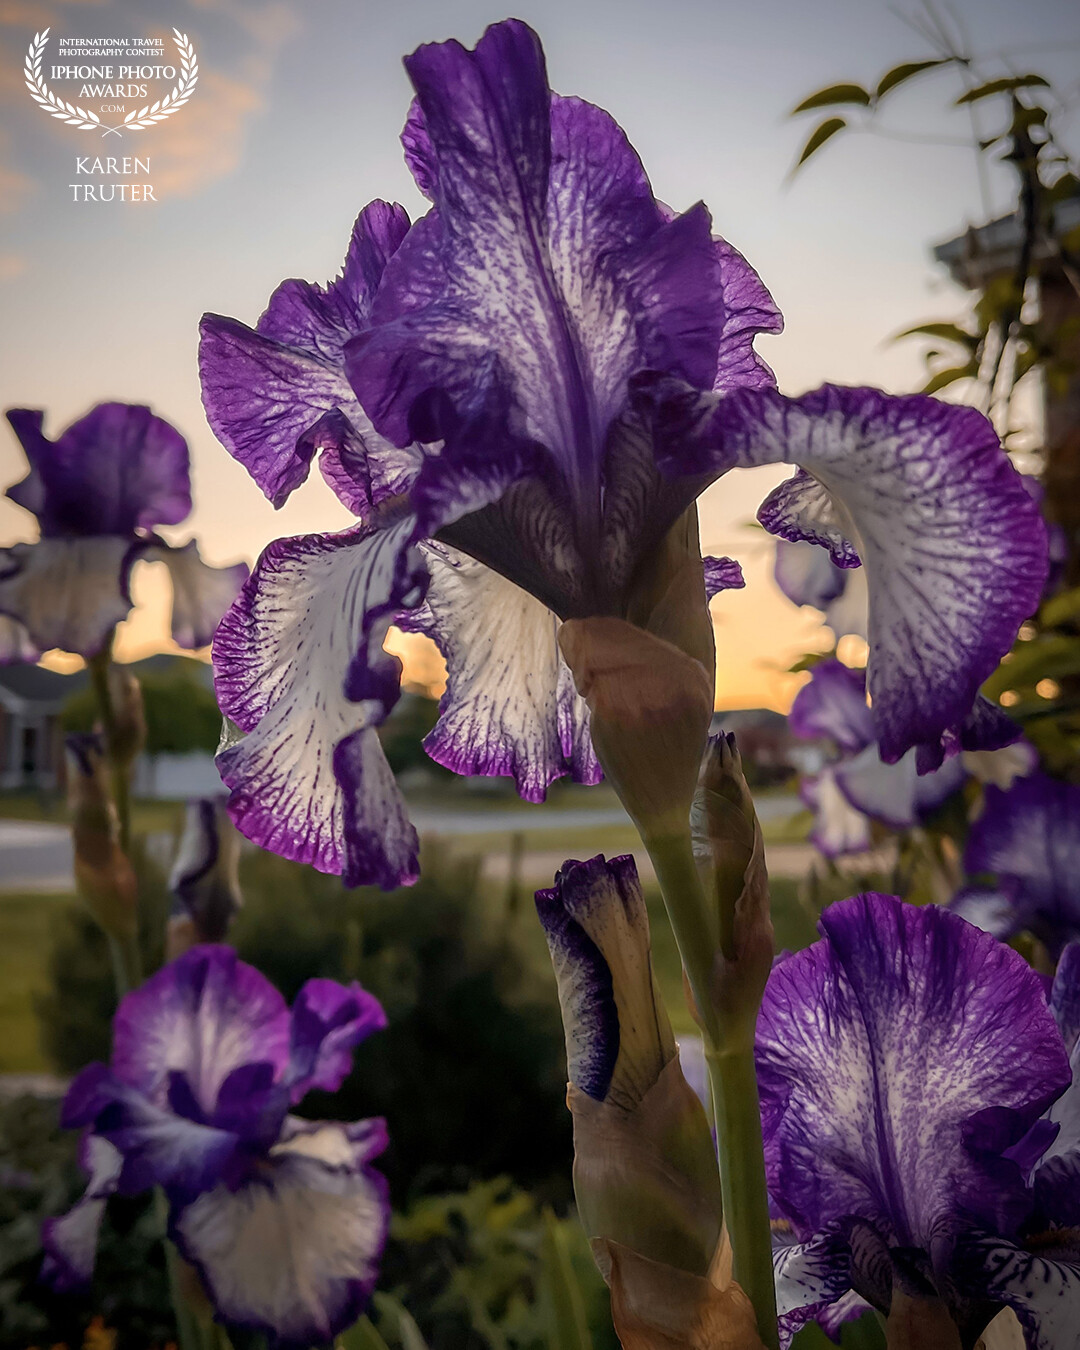 The striking purple and white of this Iris against the soft orange of the evening sky proved to be the perfect contrast of colours. The low angle photo provided the sky as the backdrop for these stunning flowers.